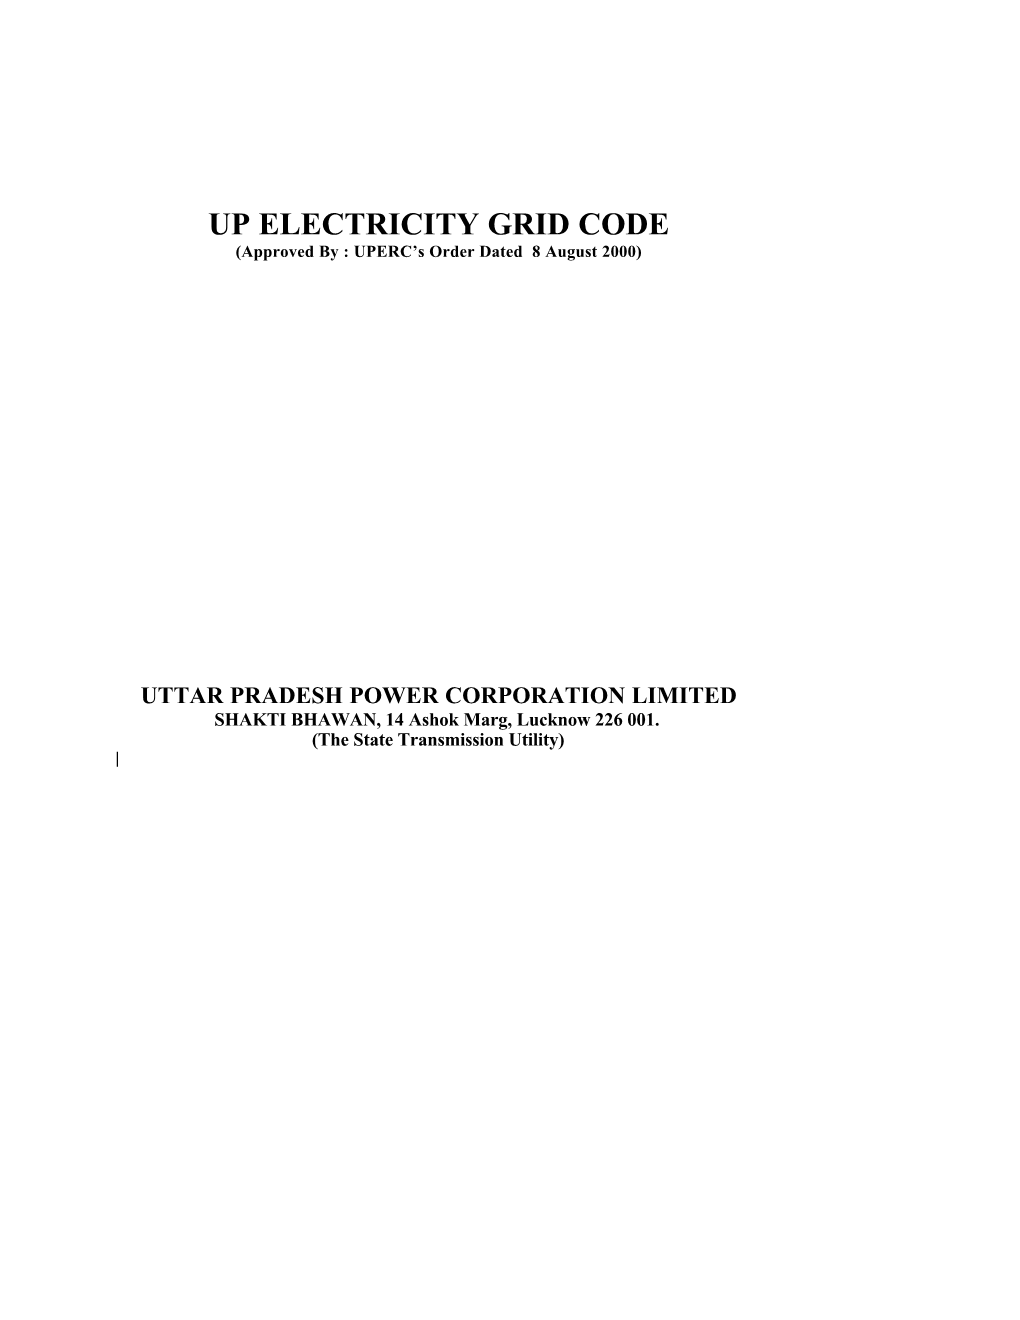 UP ELECTRICITY GRID CODE (Approved by : UPERC’S Order Dated 8 August 2000)